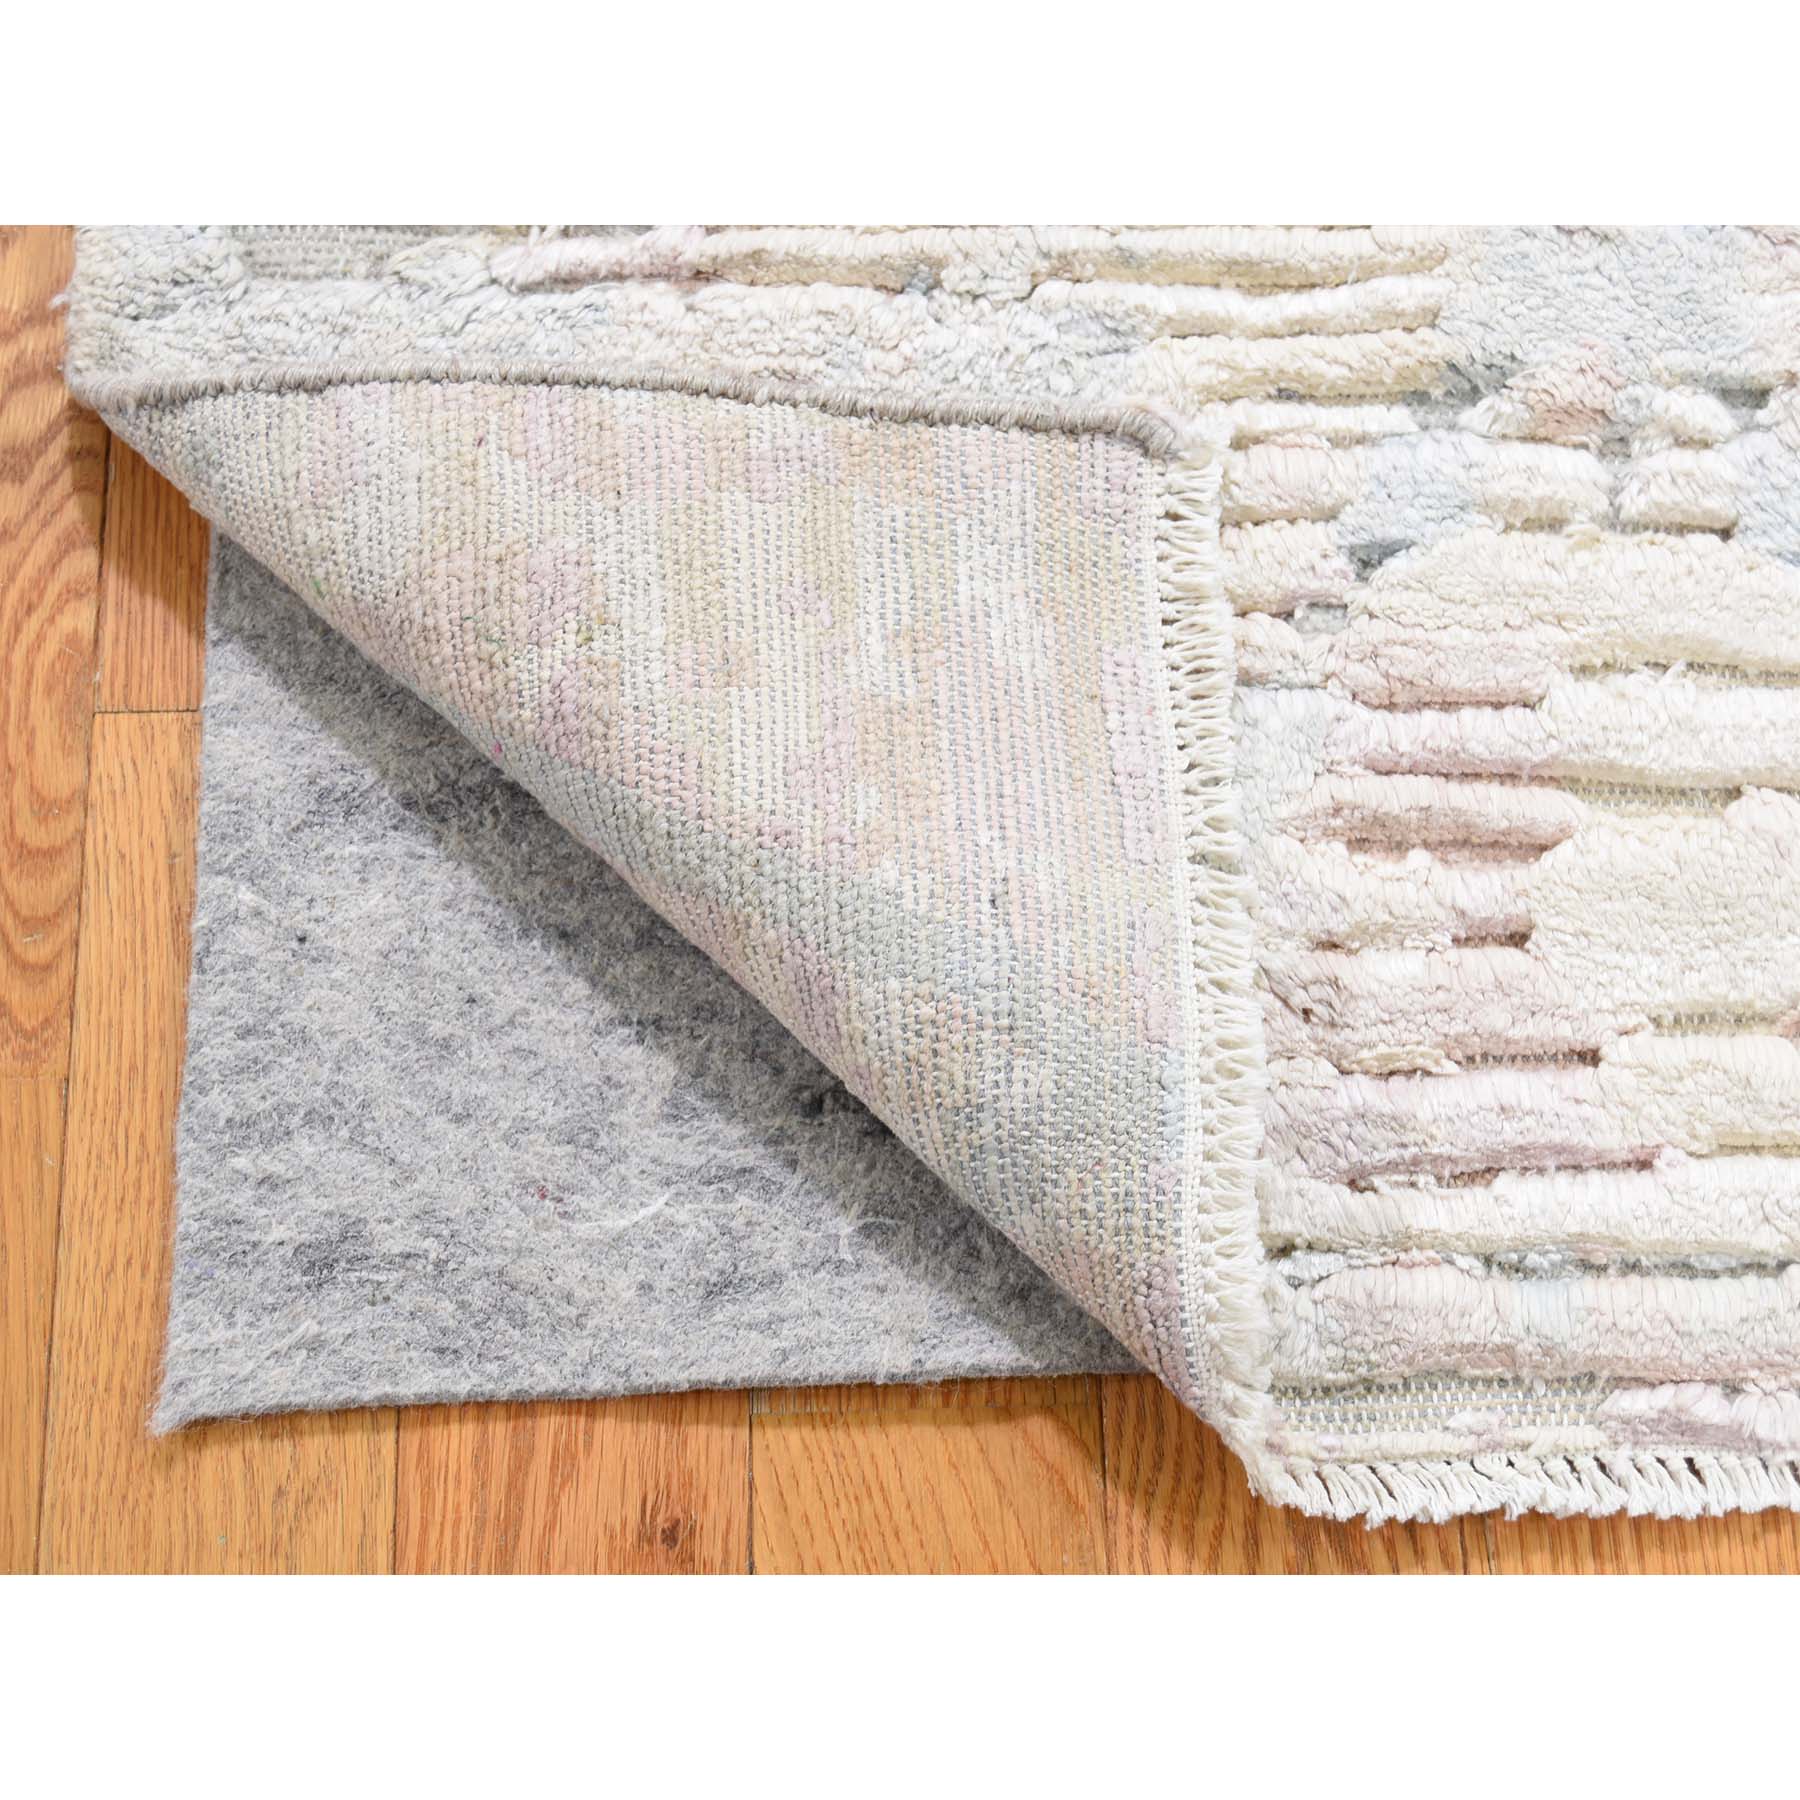 2-x2- Sampler luxurious Plush Pure Silk With Textured Wool Hand-Knotted Oriental Rug 